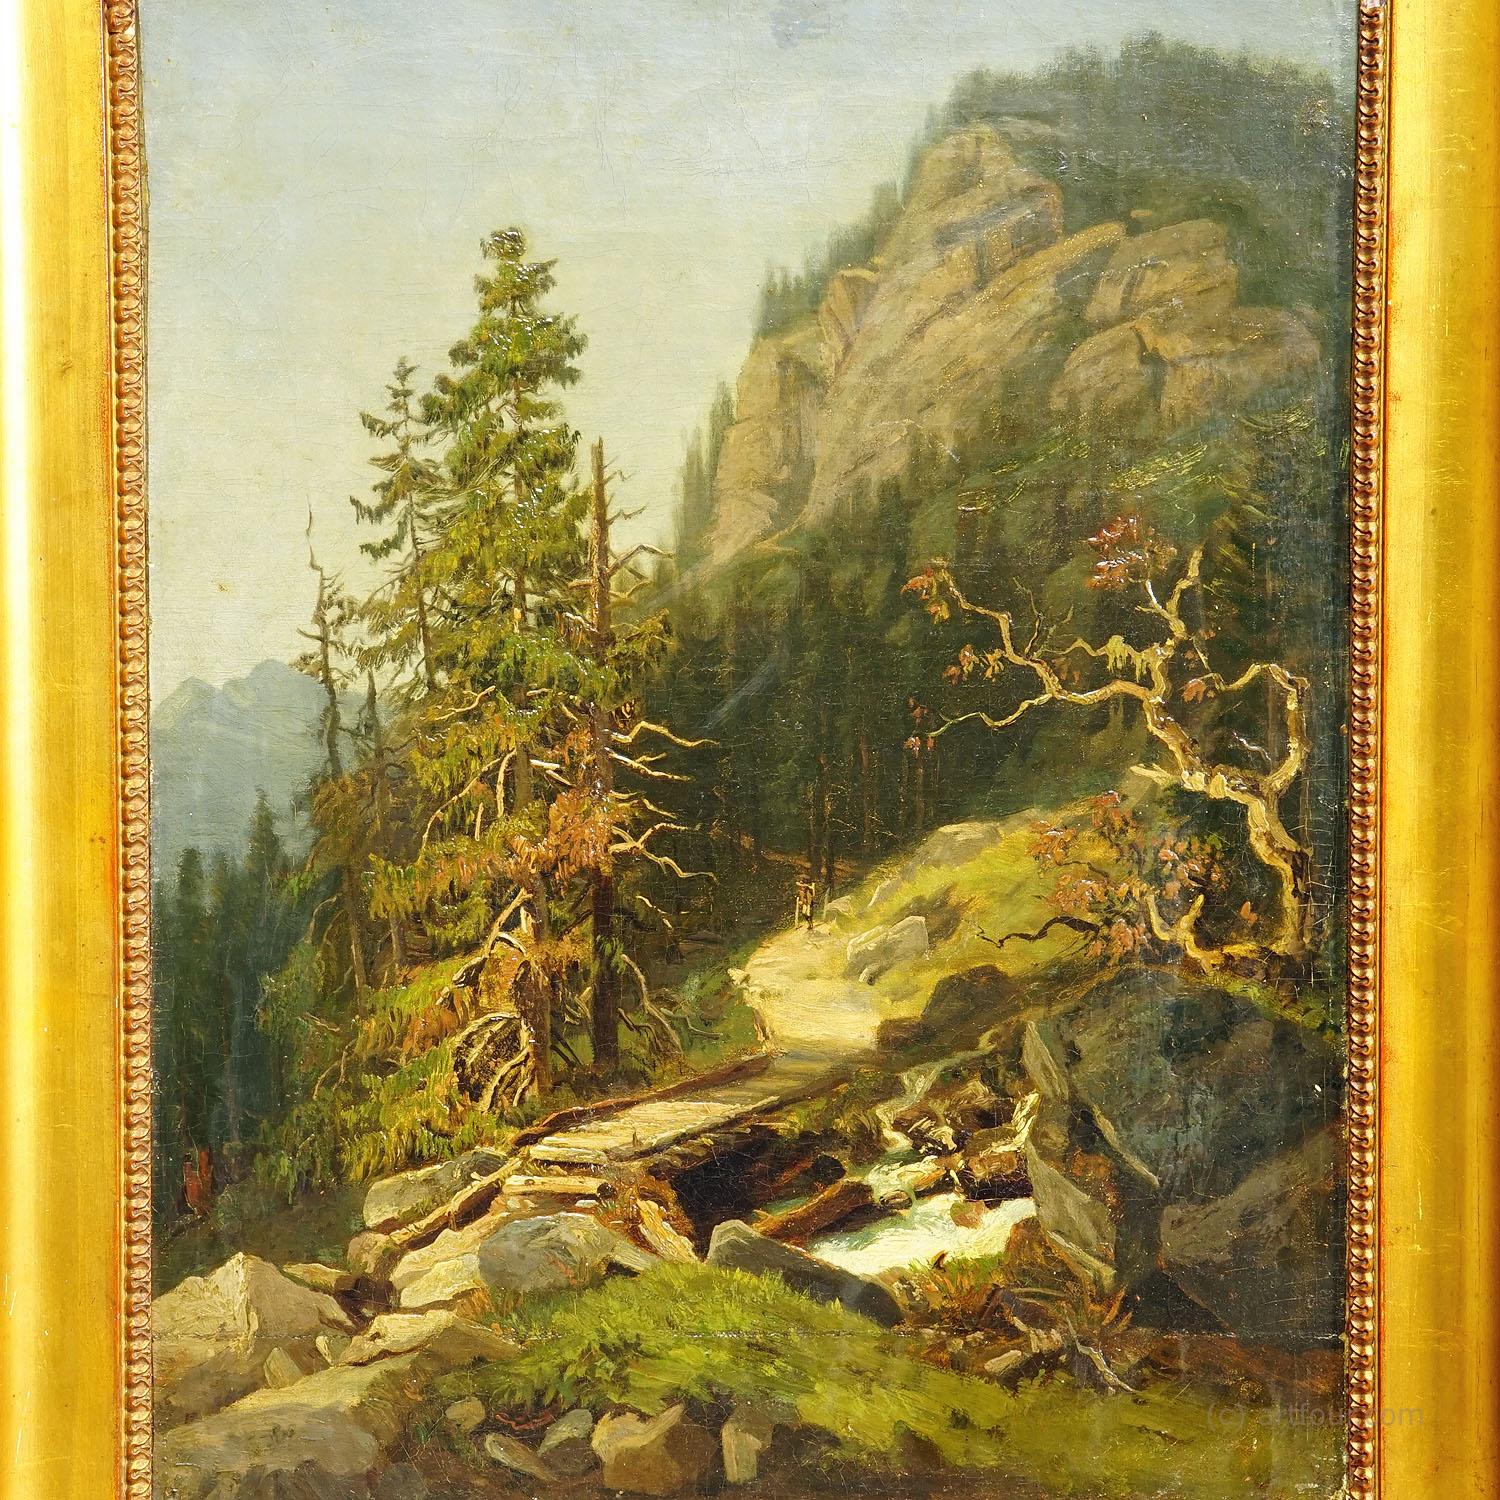 Summerly Mountain Landscape with Hiker on Hiking Trail, 19th century